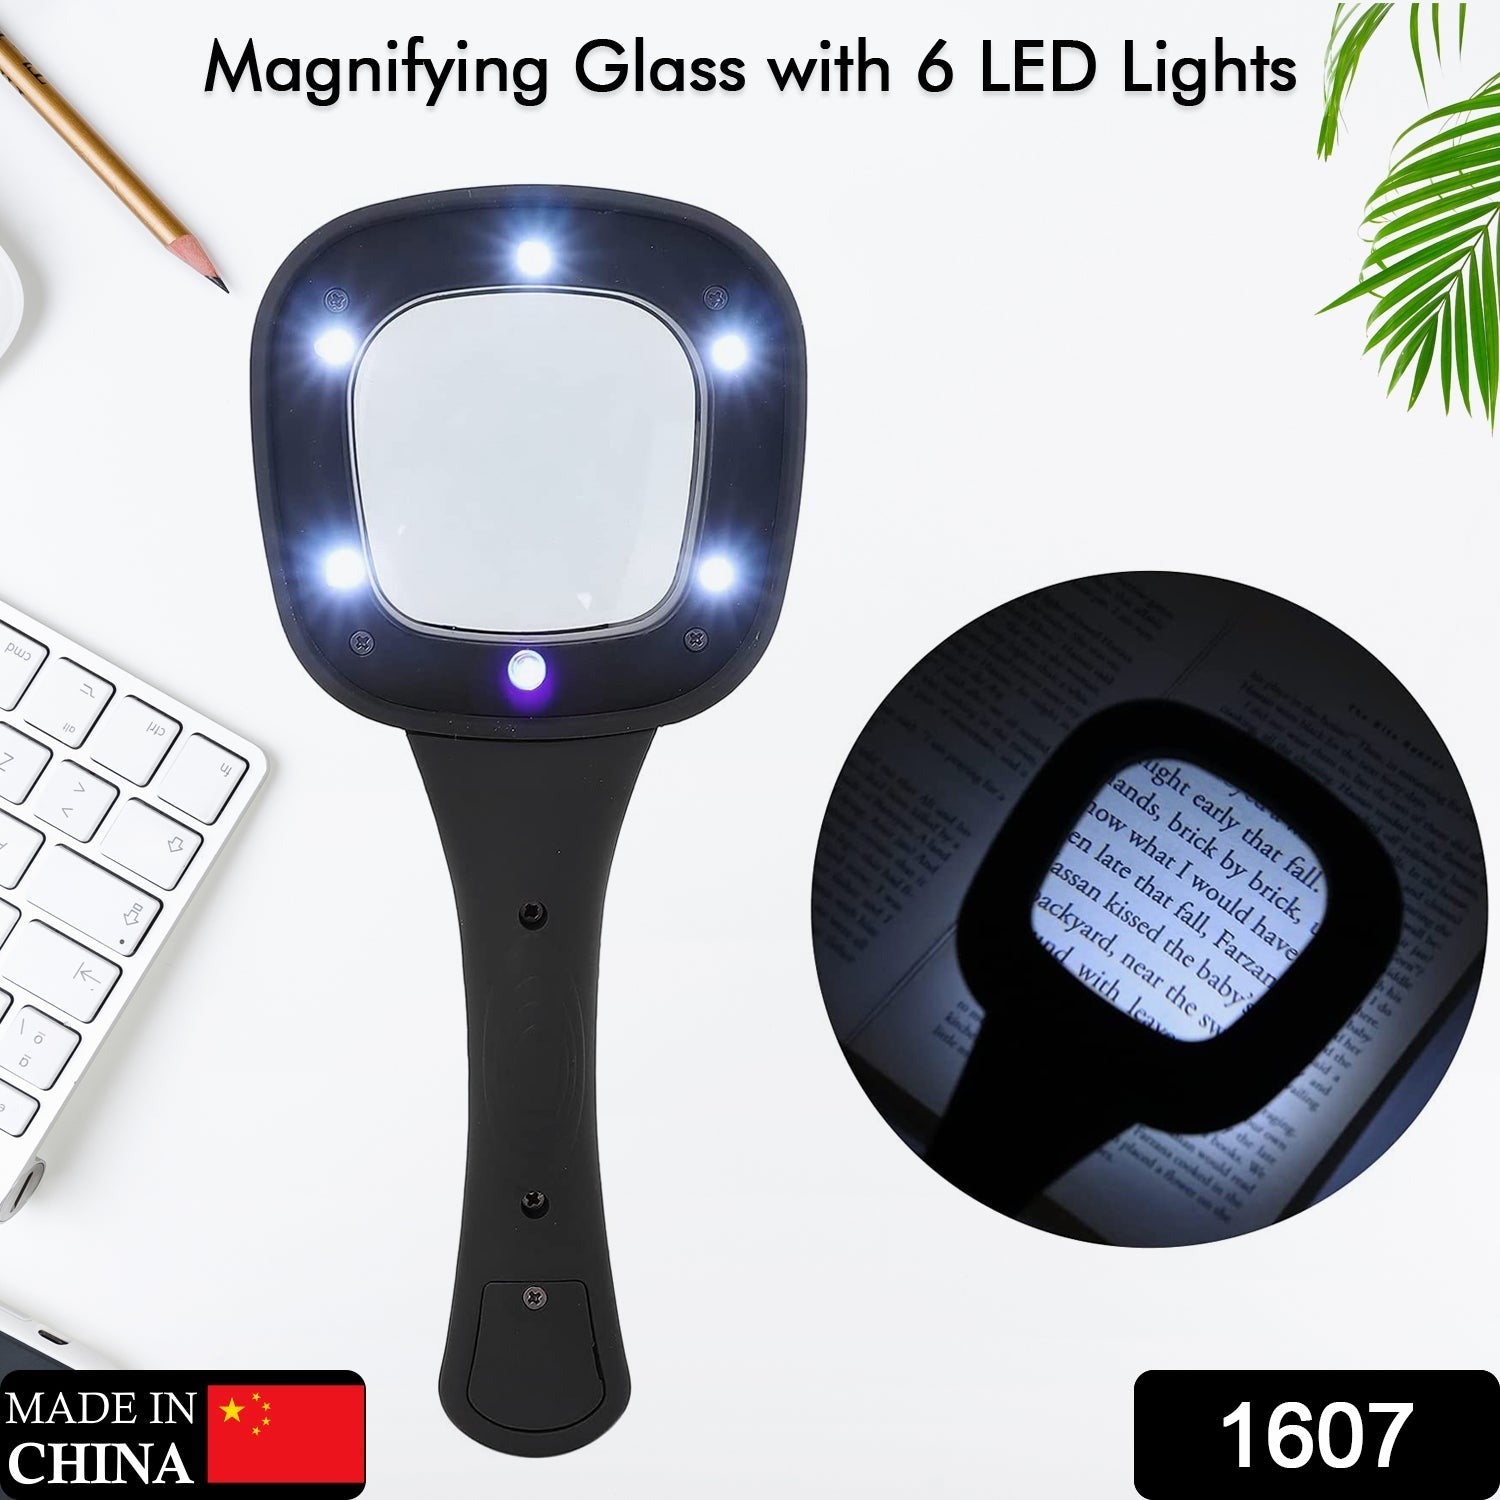 1607 Handheld Magnifying Glass 6 LED Illuminated Lighted Magnifier for Seniors Reading, Soldering, Inspection, Coins, Jewelry, Exploring